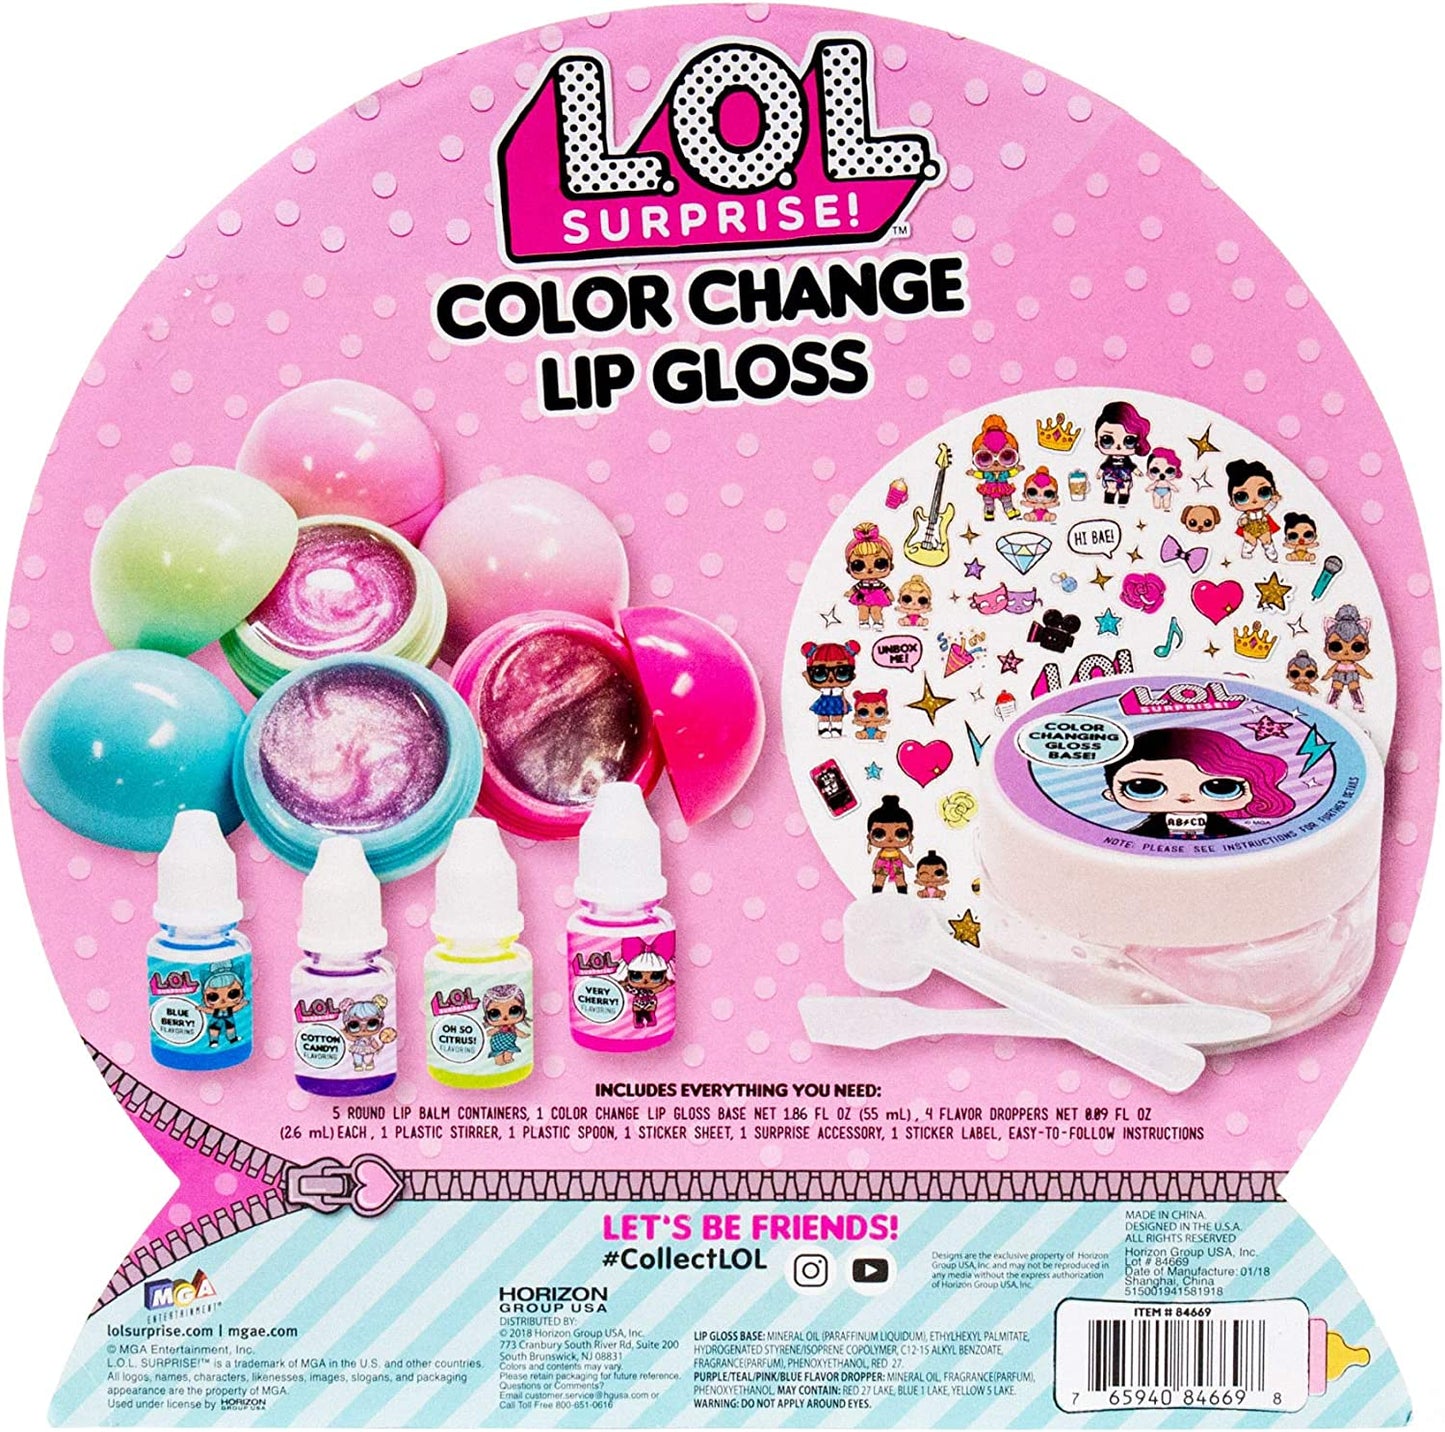 L.O.L. Surprise! Color Change Lip Gloss By Horizon Group USA, Mix & Create 5 Color Changing Multi Flavored Lip Glosses,DIY Lip Gloss Making Kit, Containers & Decorative Stickers Included.Multicolored